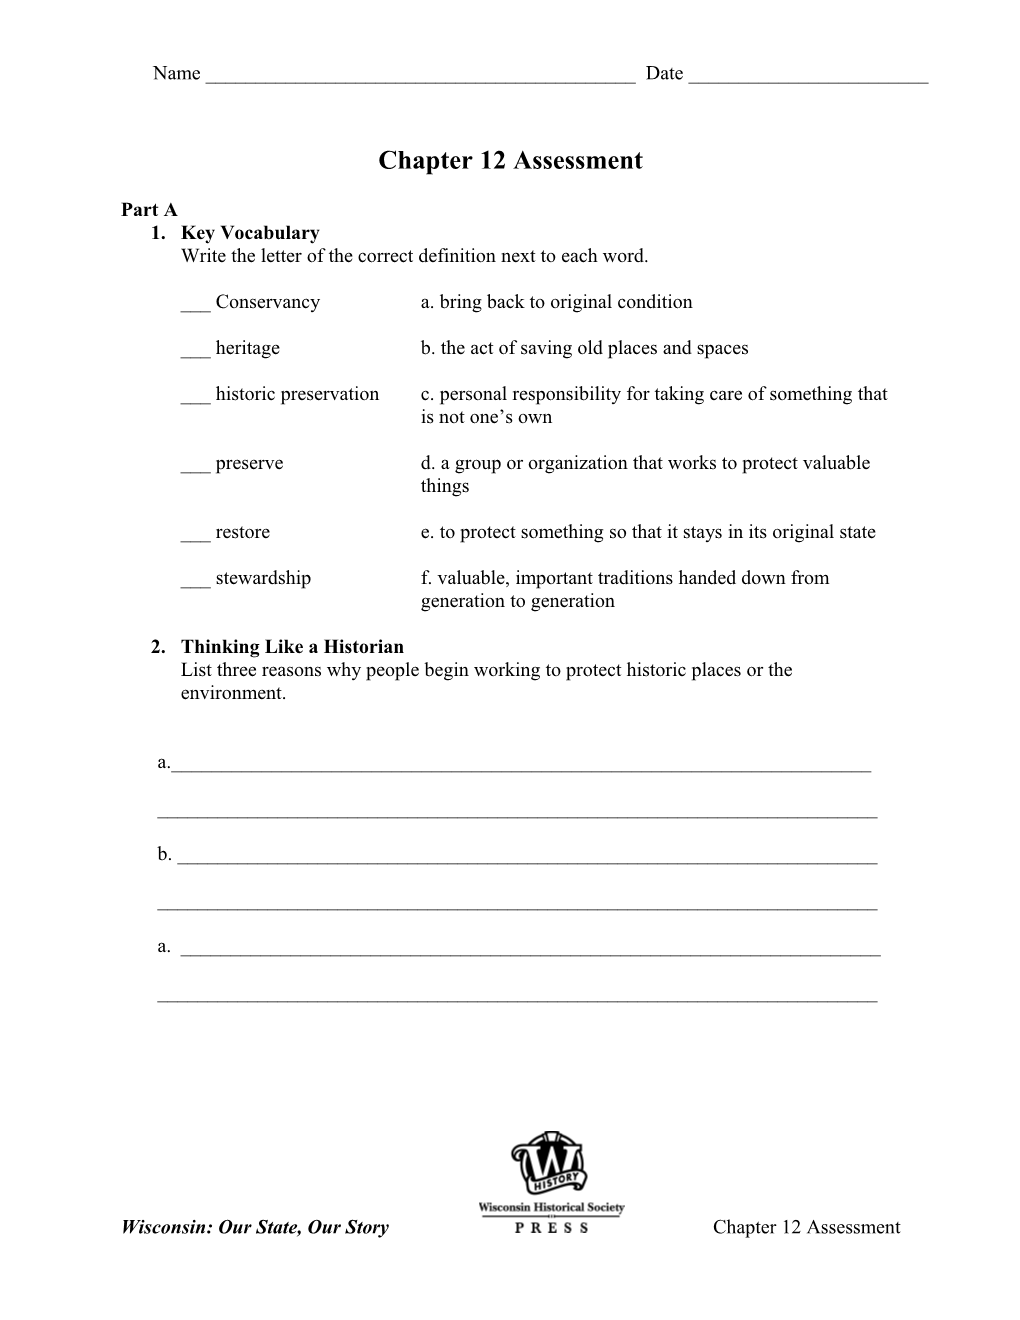 Chapter 12 Assessment - Parts 1, 2 and 3